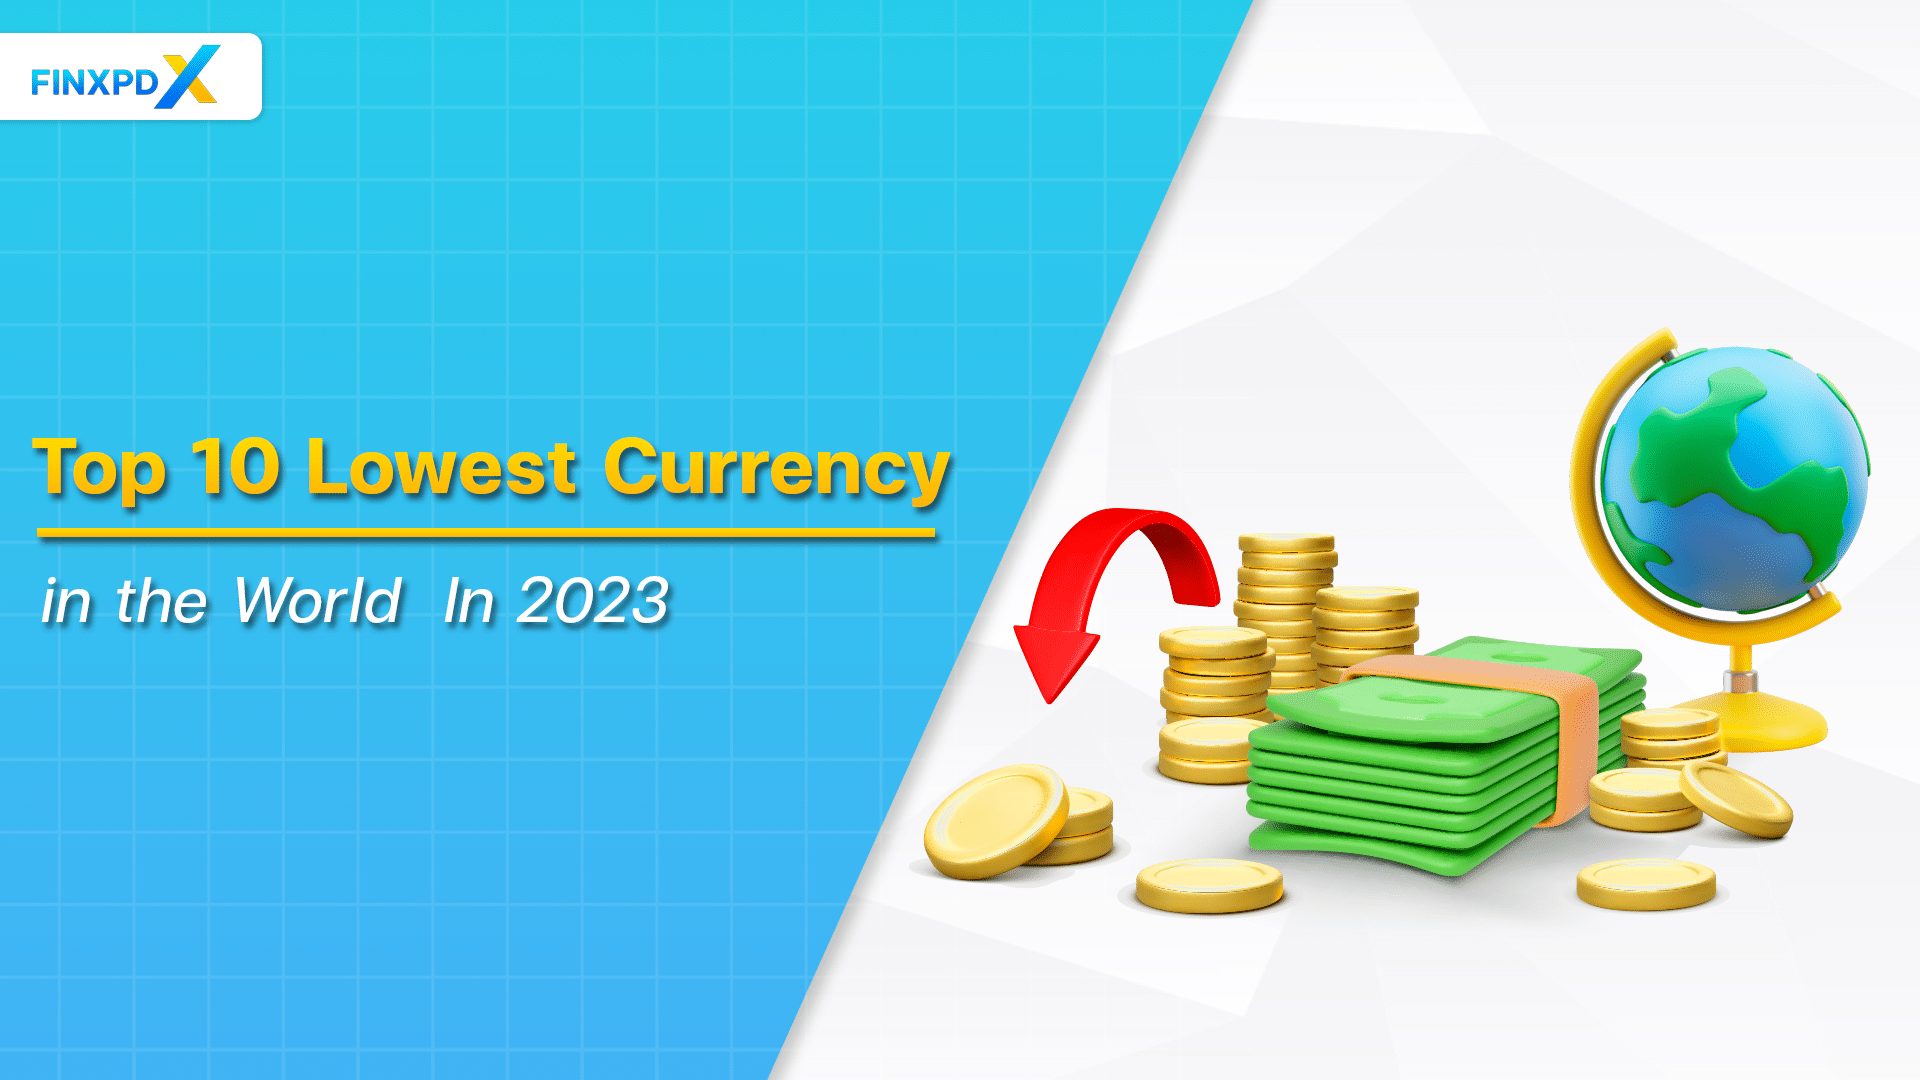 Top 10 Lowest Currency in the World in 2023 